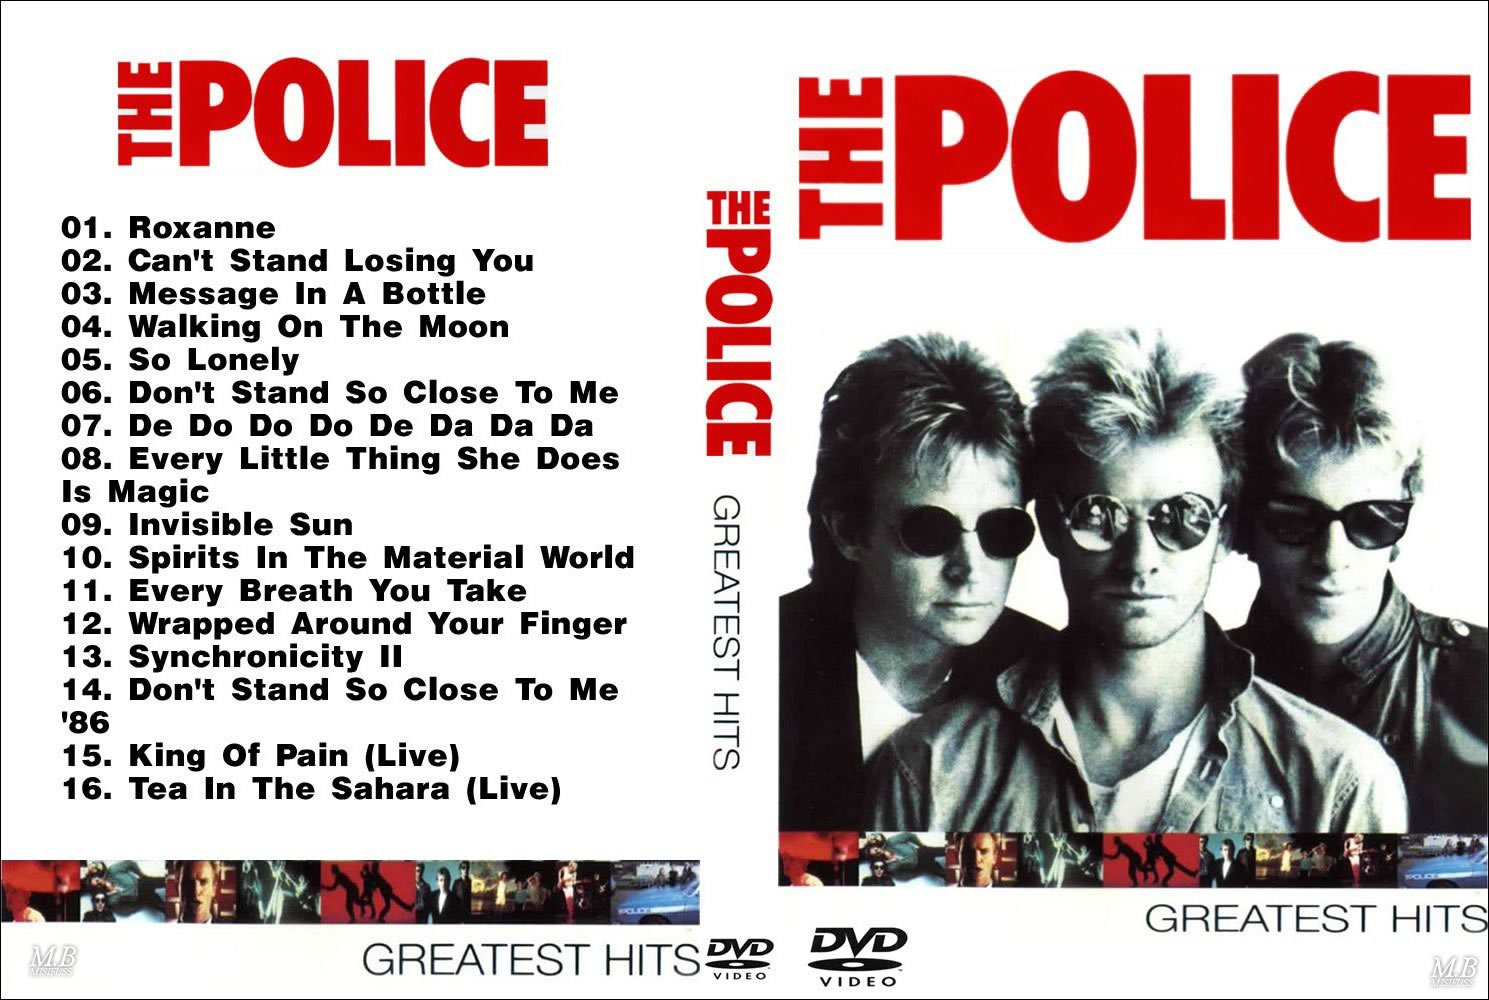 The police don t have. The Police Greatest Hits 1992. Police "Greatest Hits". The Police альбомы. Sting the Police.